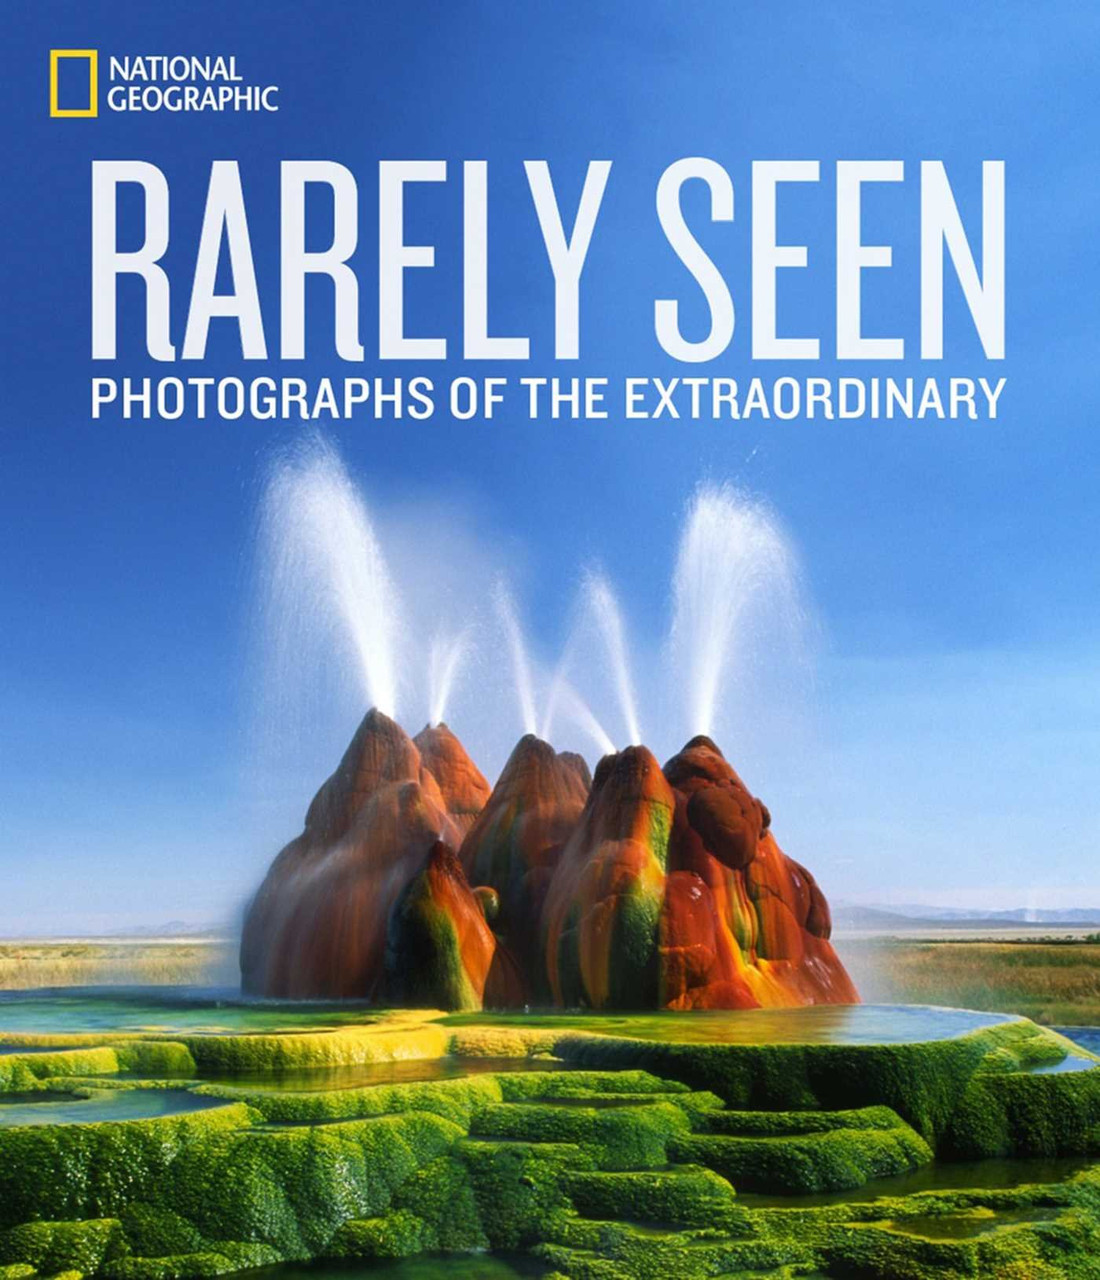 Photographs　BookPal　of　Seen:　Extraordinary　[Hardcover]　Rarely　the